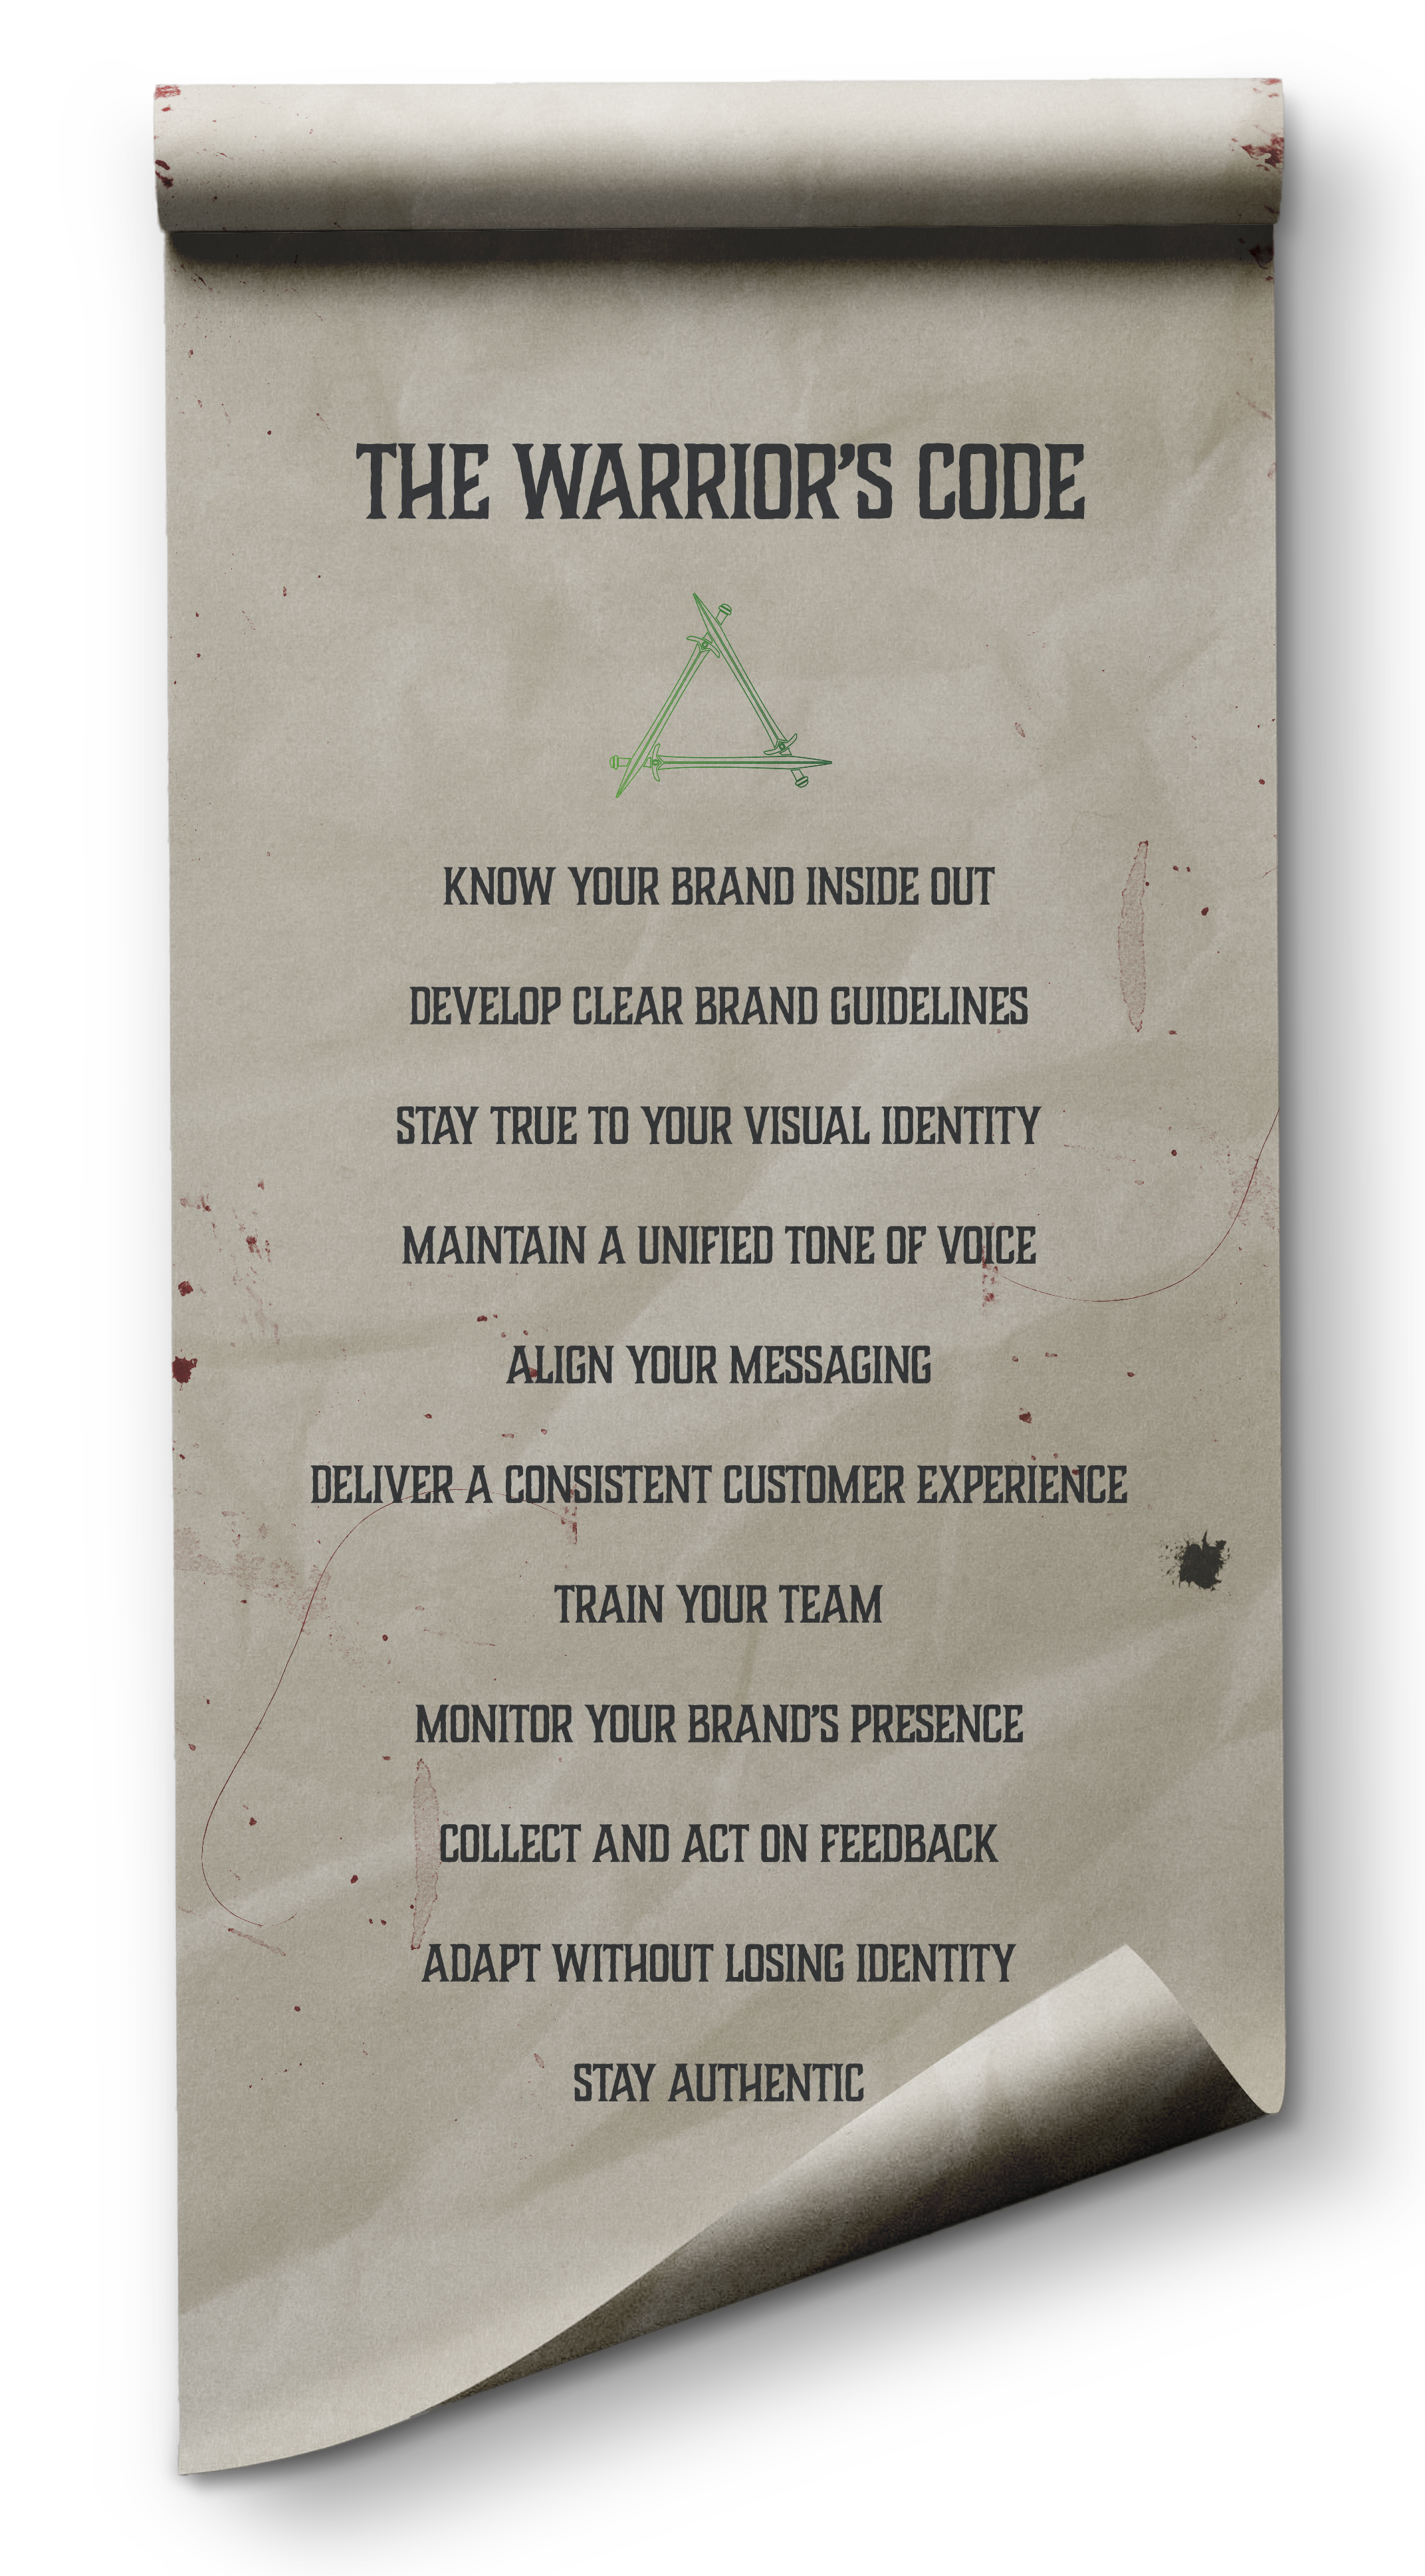 The Warrior's code - Rules for brand consistency